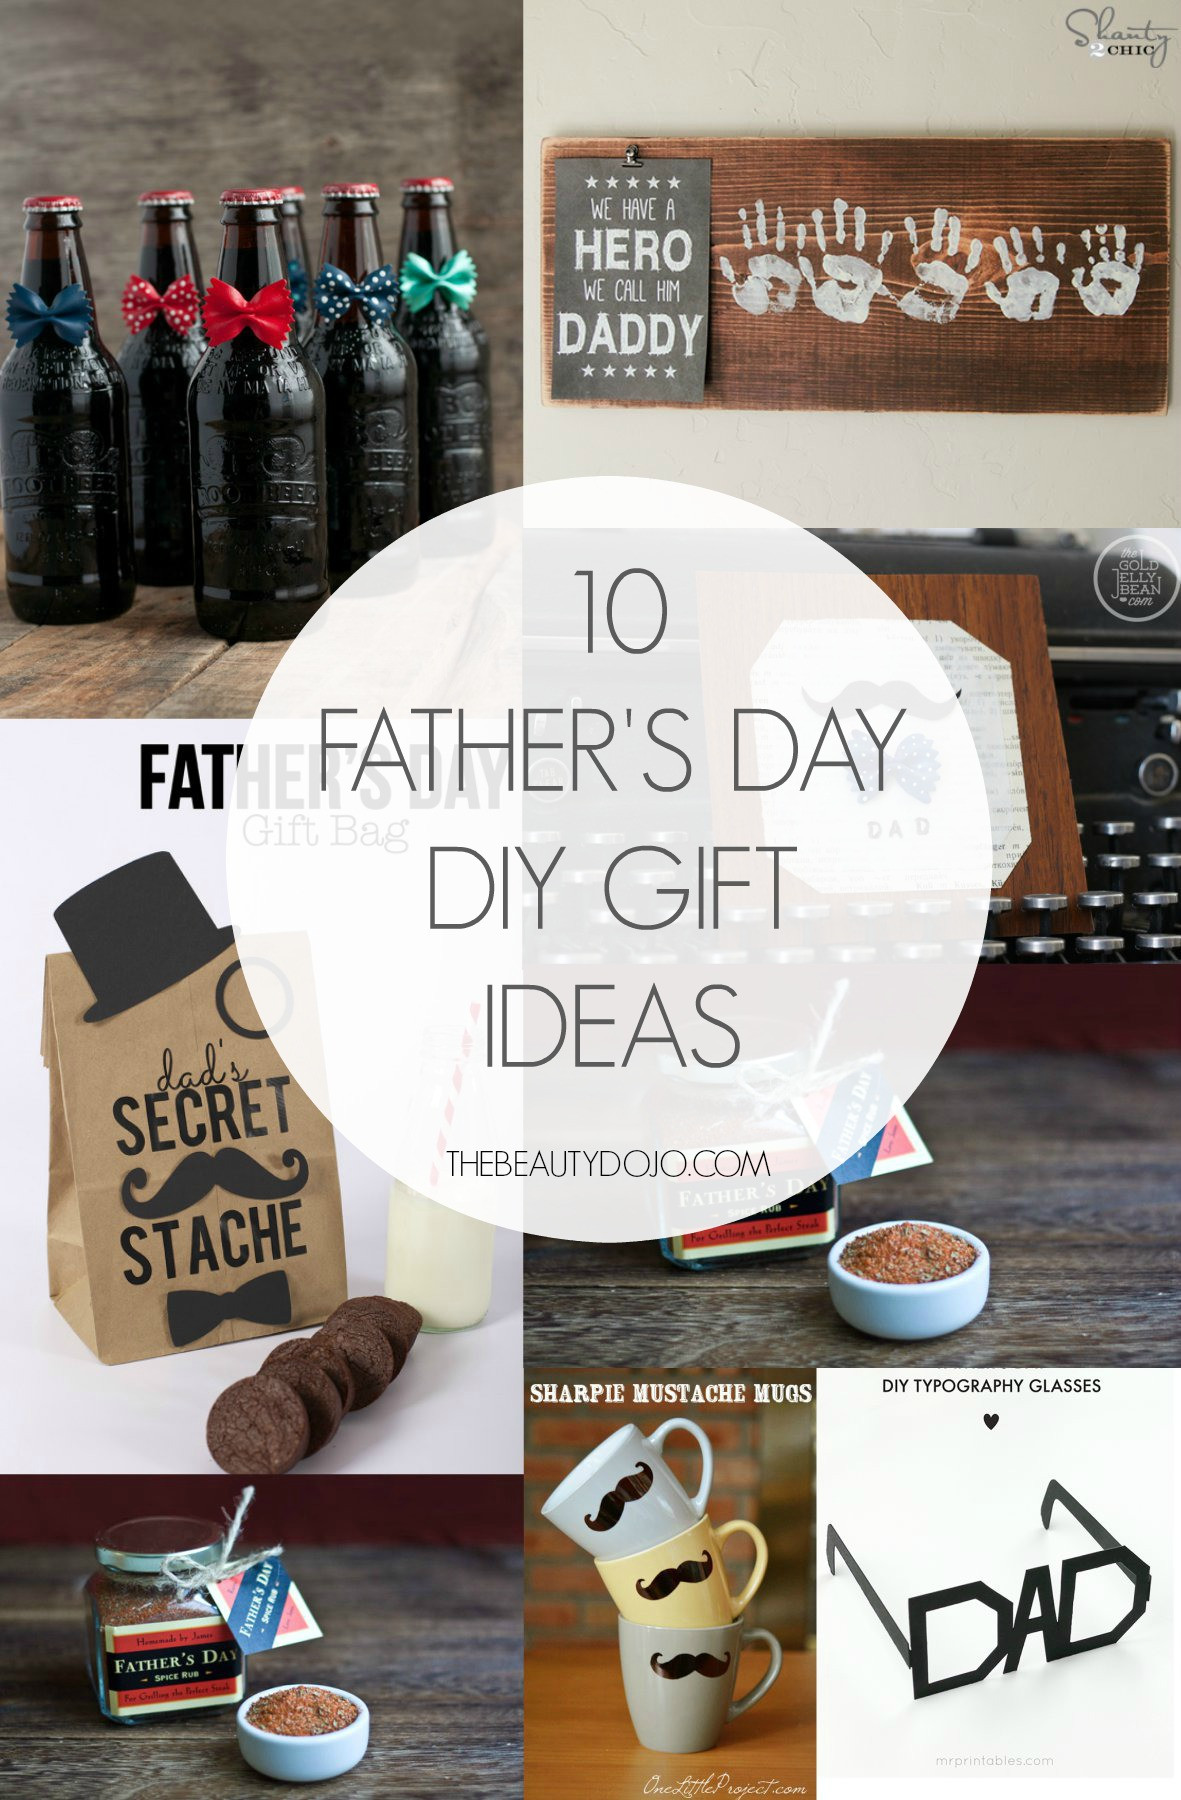 Best Father'S Day Gift Ideas
 10 Father s Day DIY Gift Ideas The Beautydojo